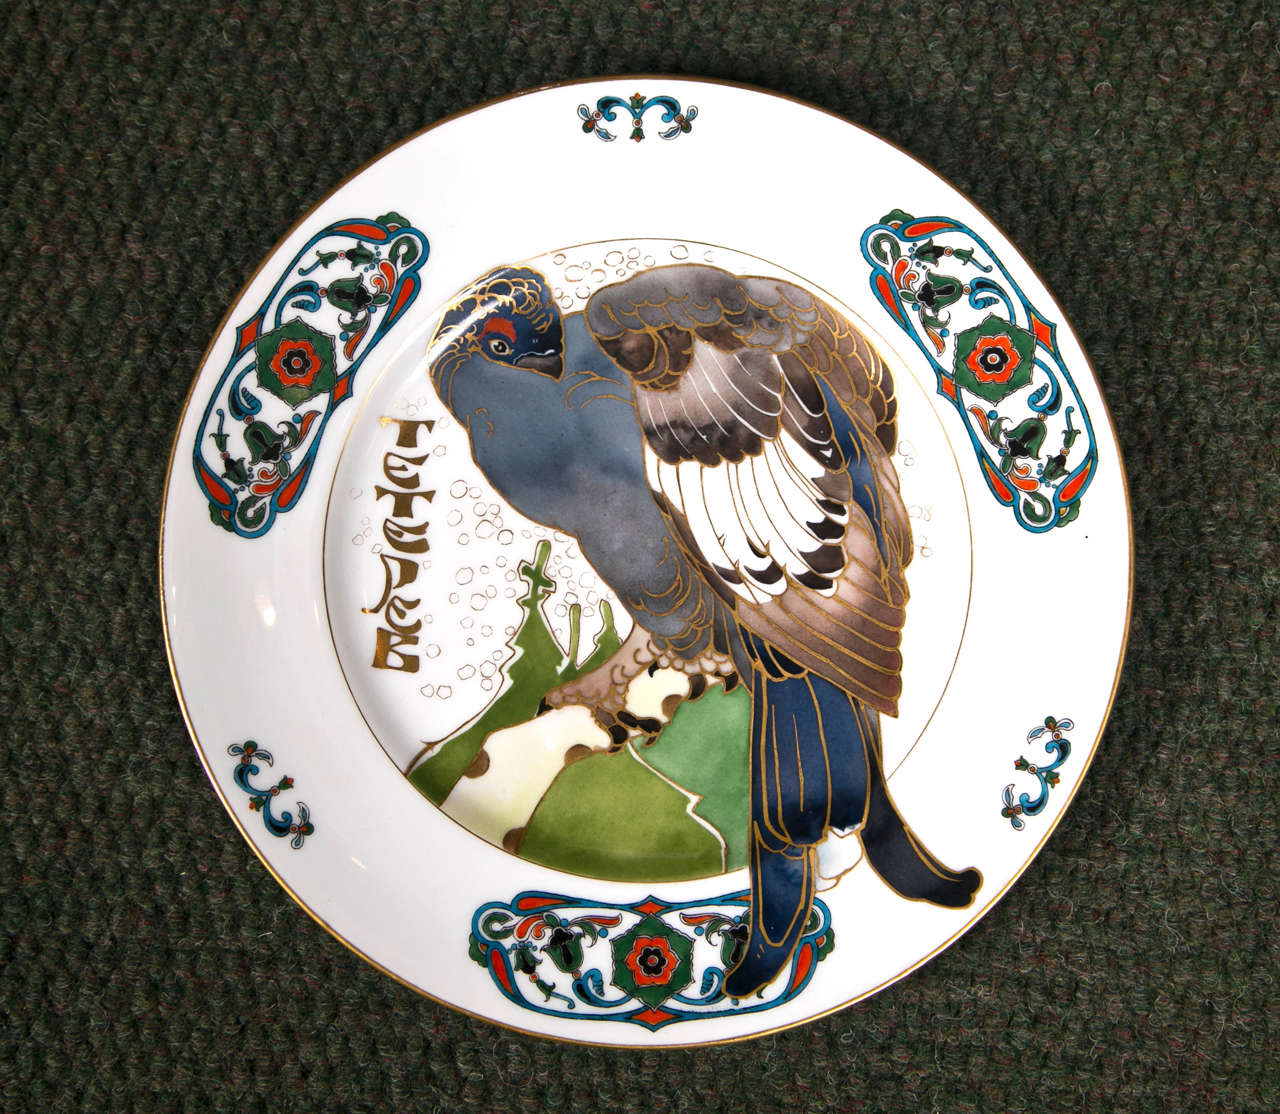 Glazed Russian Plates from the Kornilov Factory